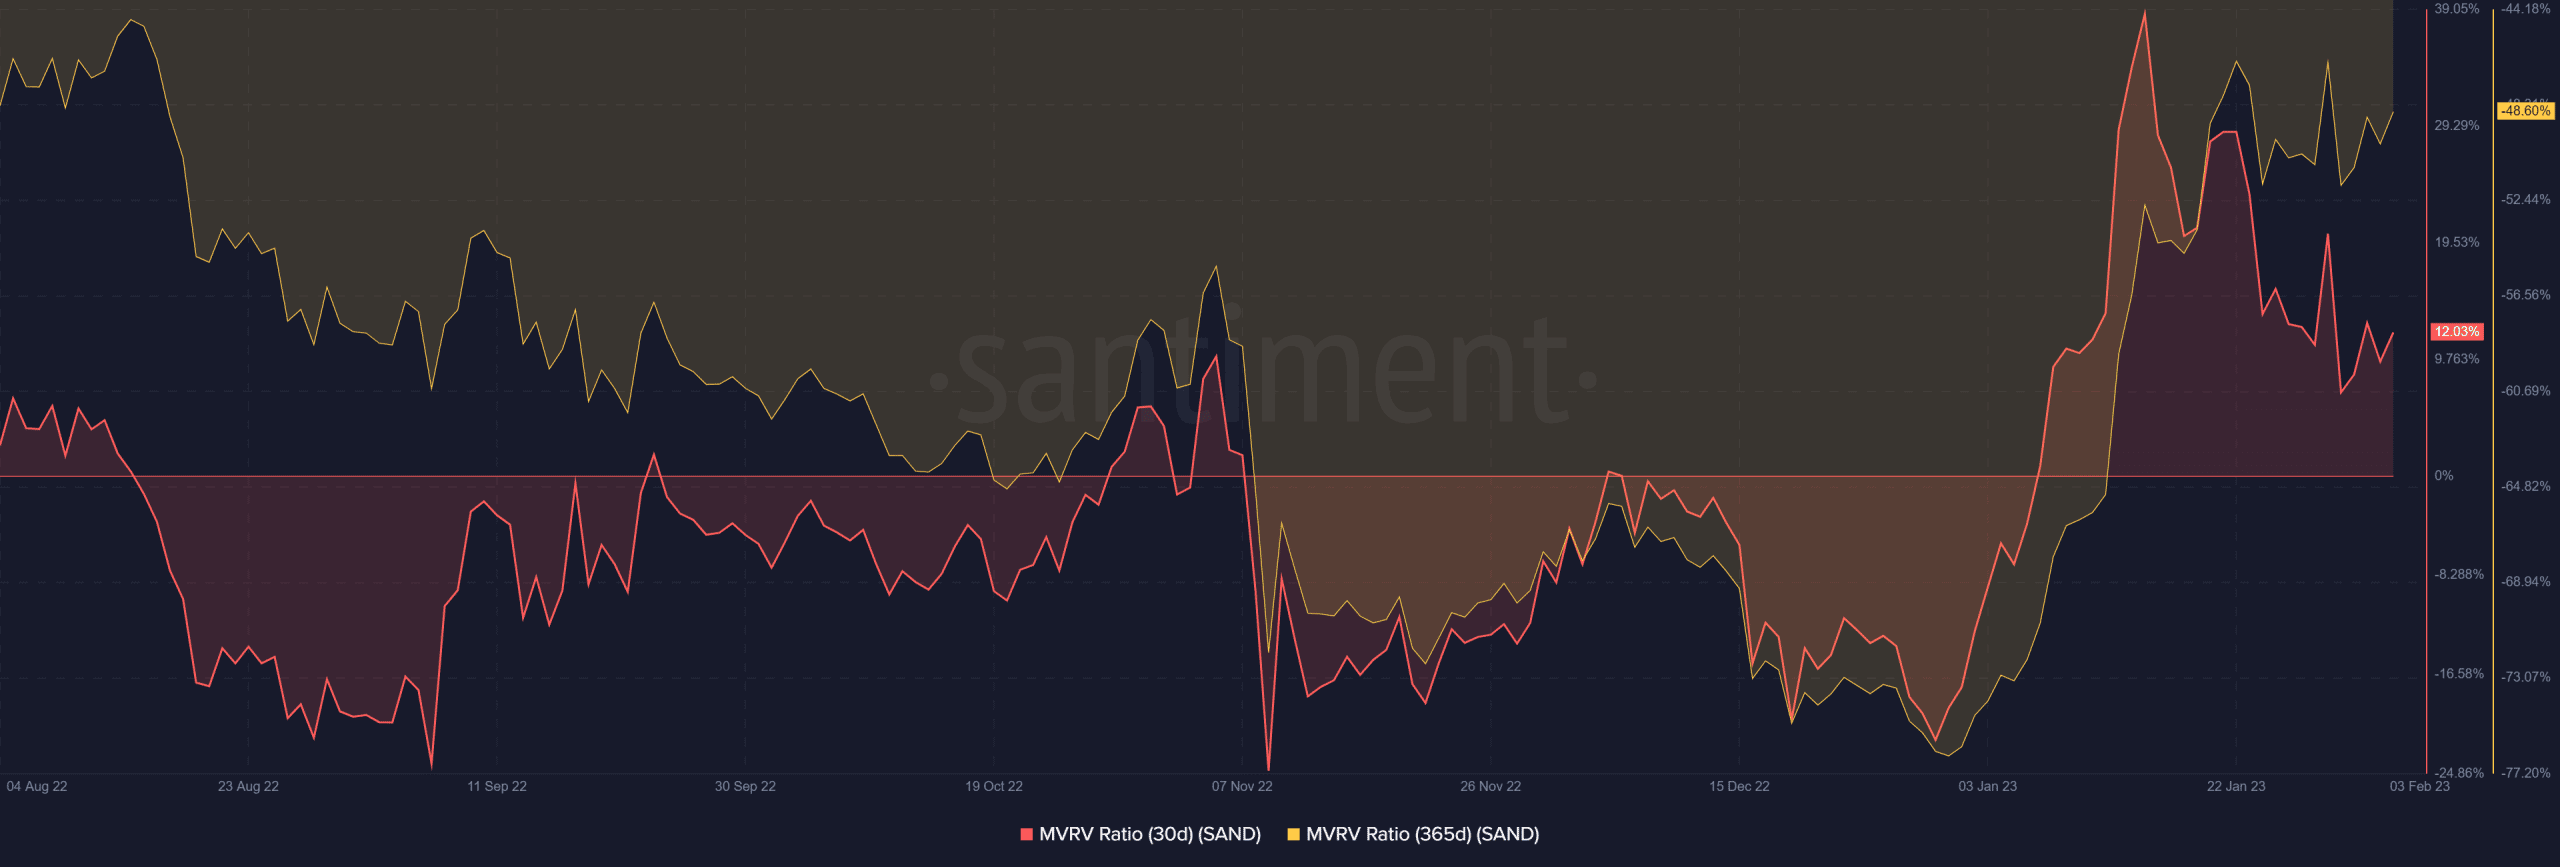 MVRV for the past 365 days is 48.60%, while MVRV for the last 30 days is 12.03% (Source: Santiment)